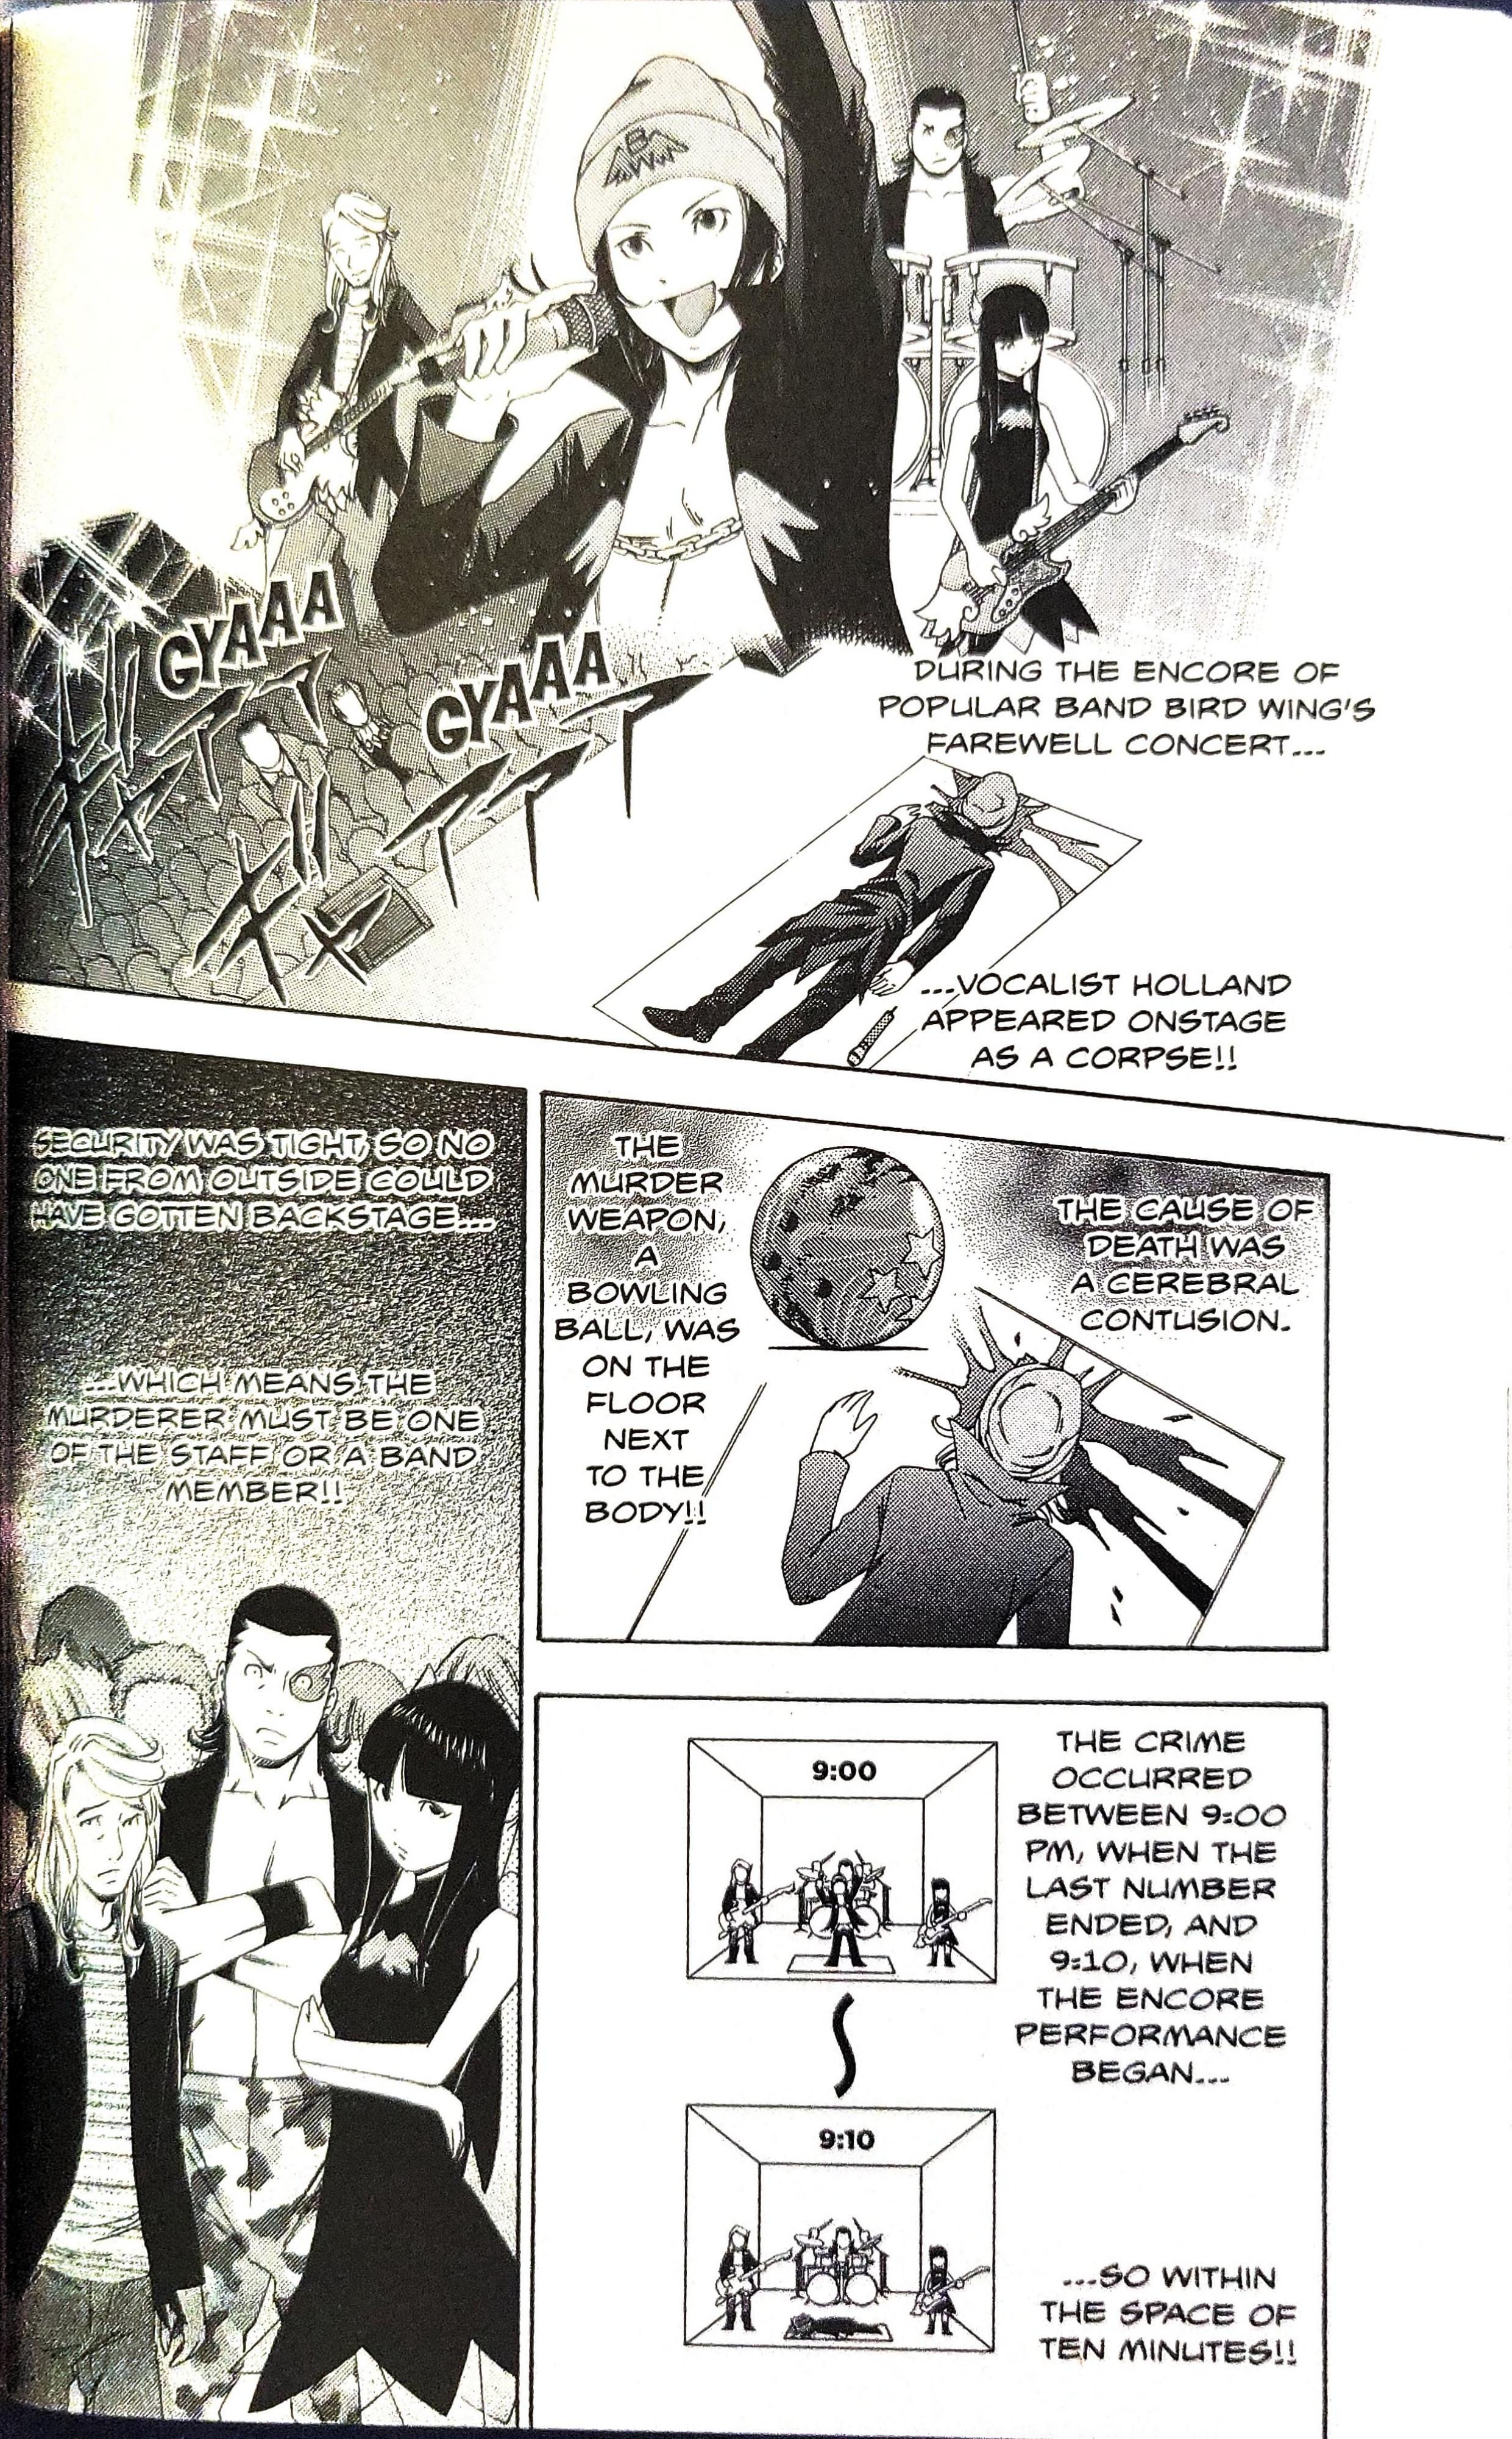 Gyakuten Kenji Vol.1 Chapter 3: The Turnabout Last Number (2) - Picture 2